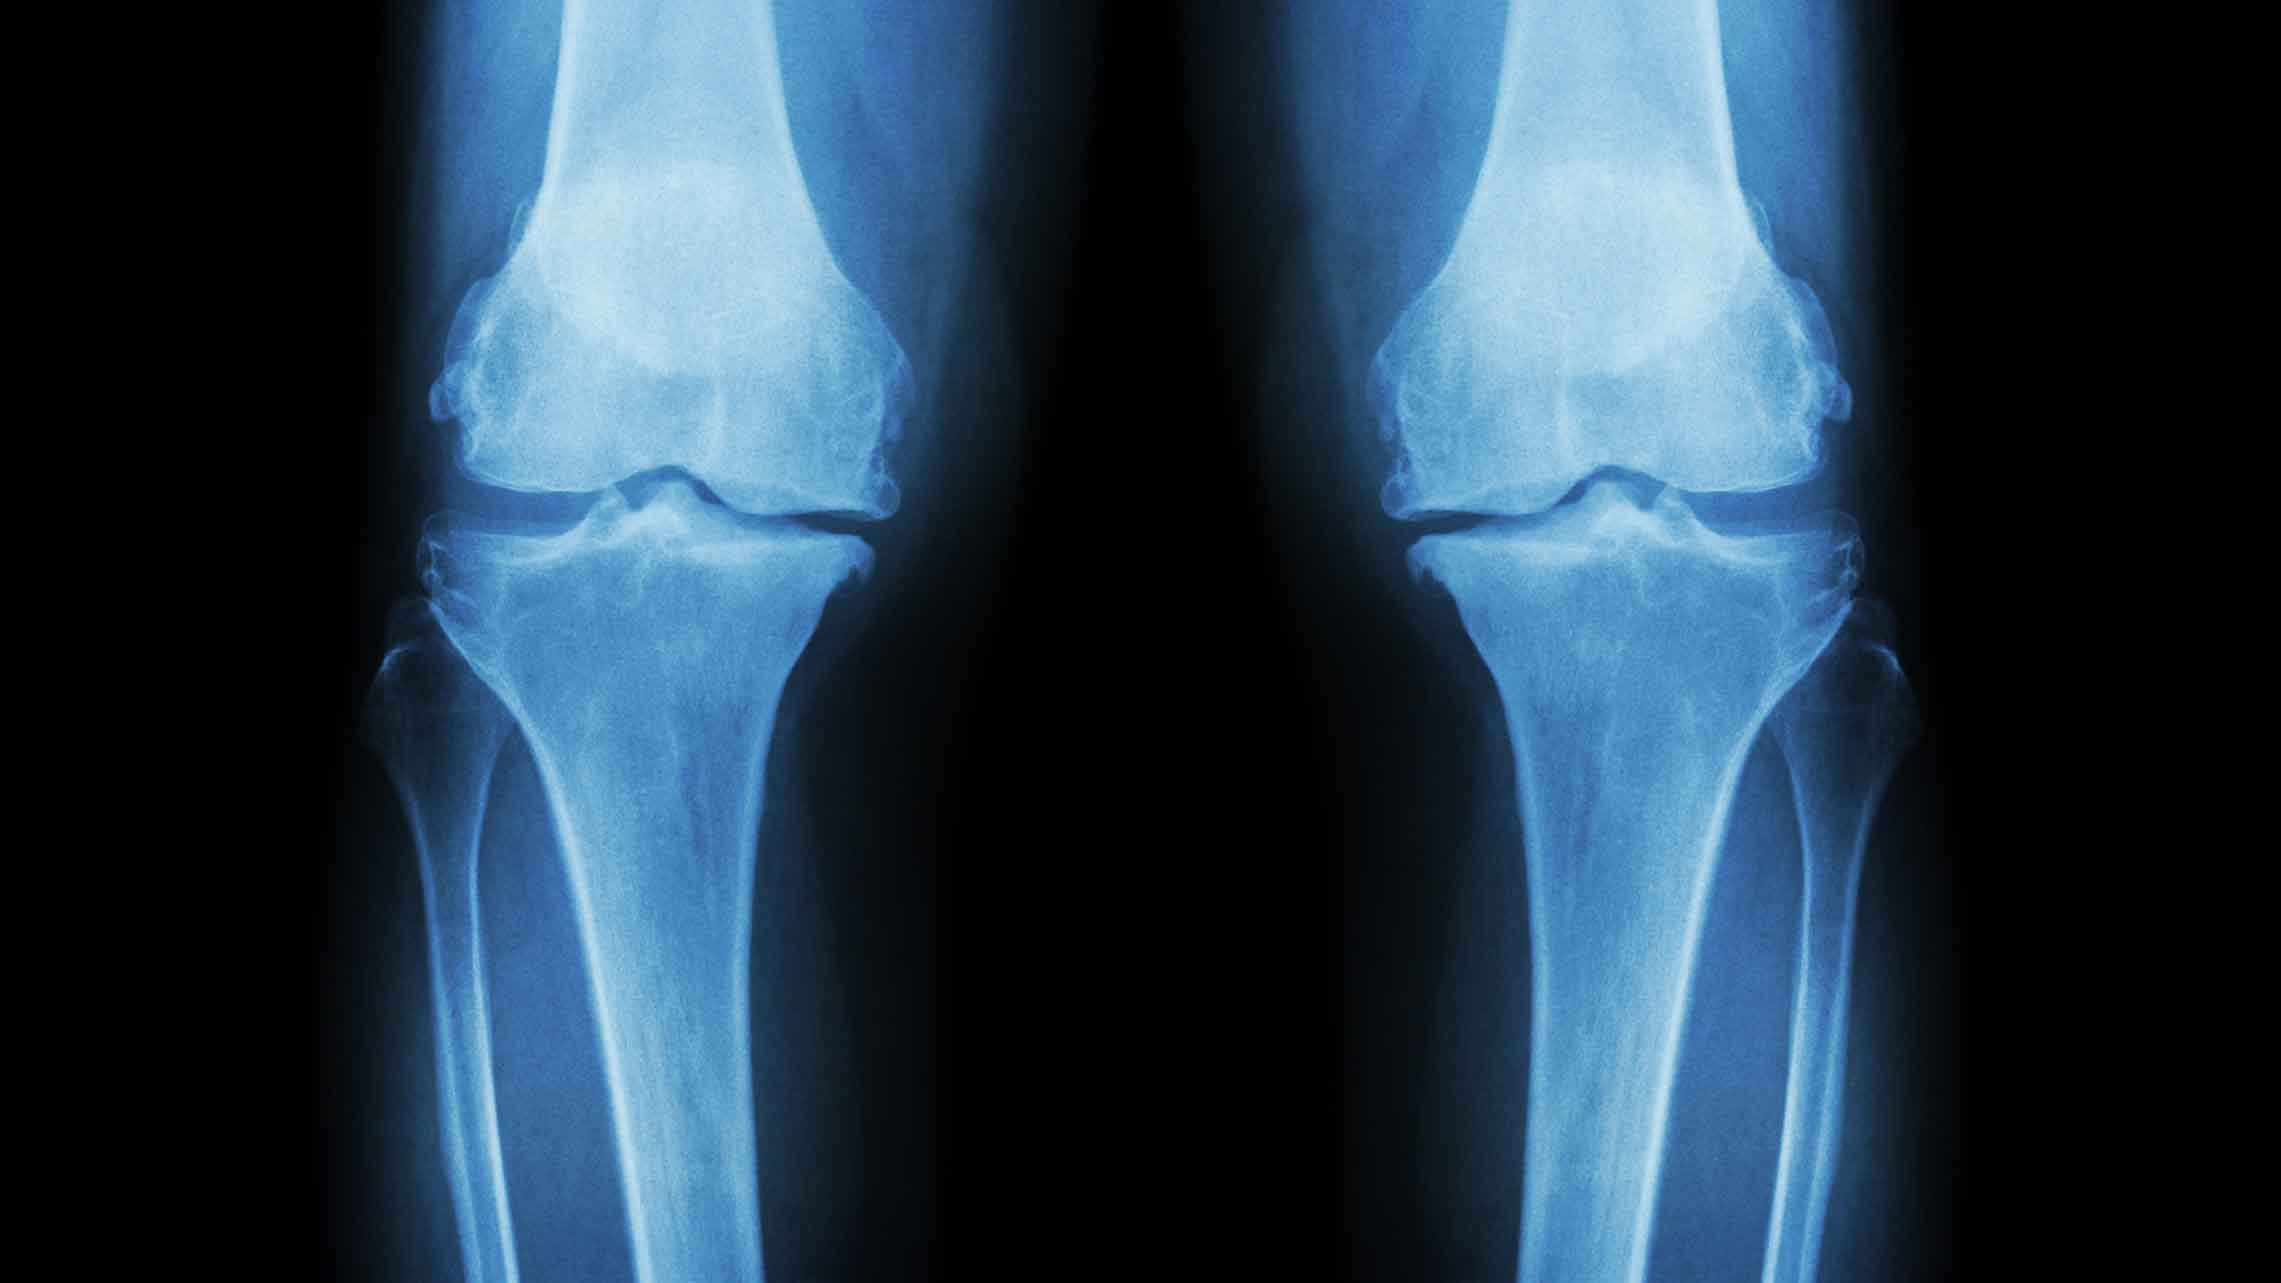 How To Support Bone Health & Prevent Osteoporosis With Correct Nutrition